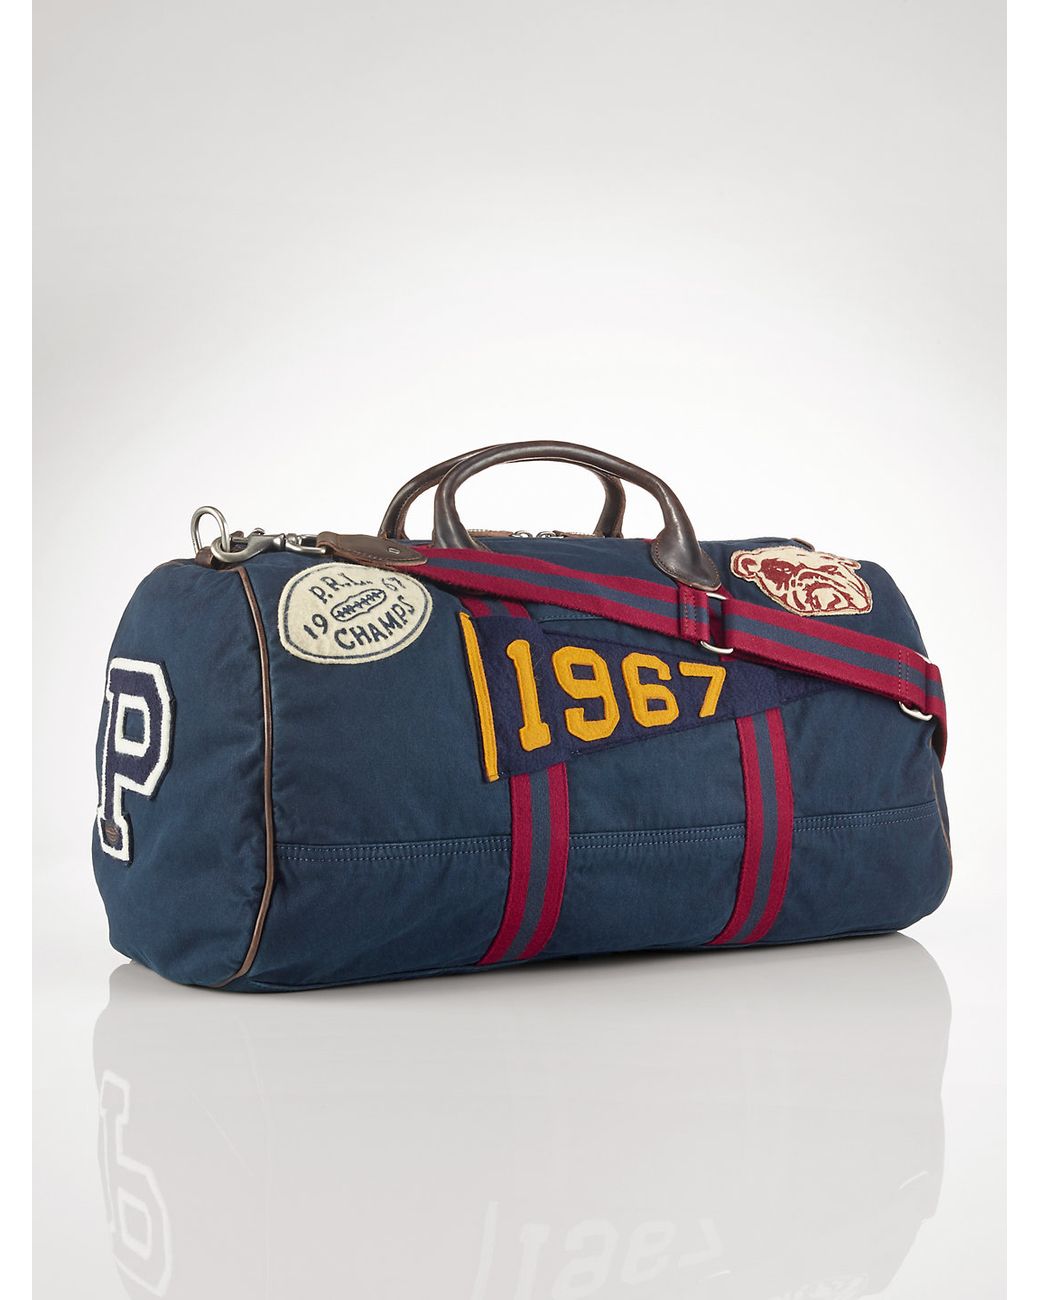 Polo Ralph Lauren logo-embroidered Canvas Duffle Bag - Newport Navy/New Forest